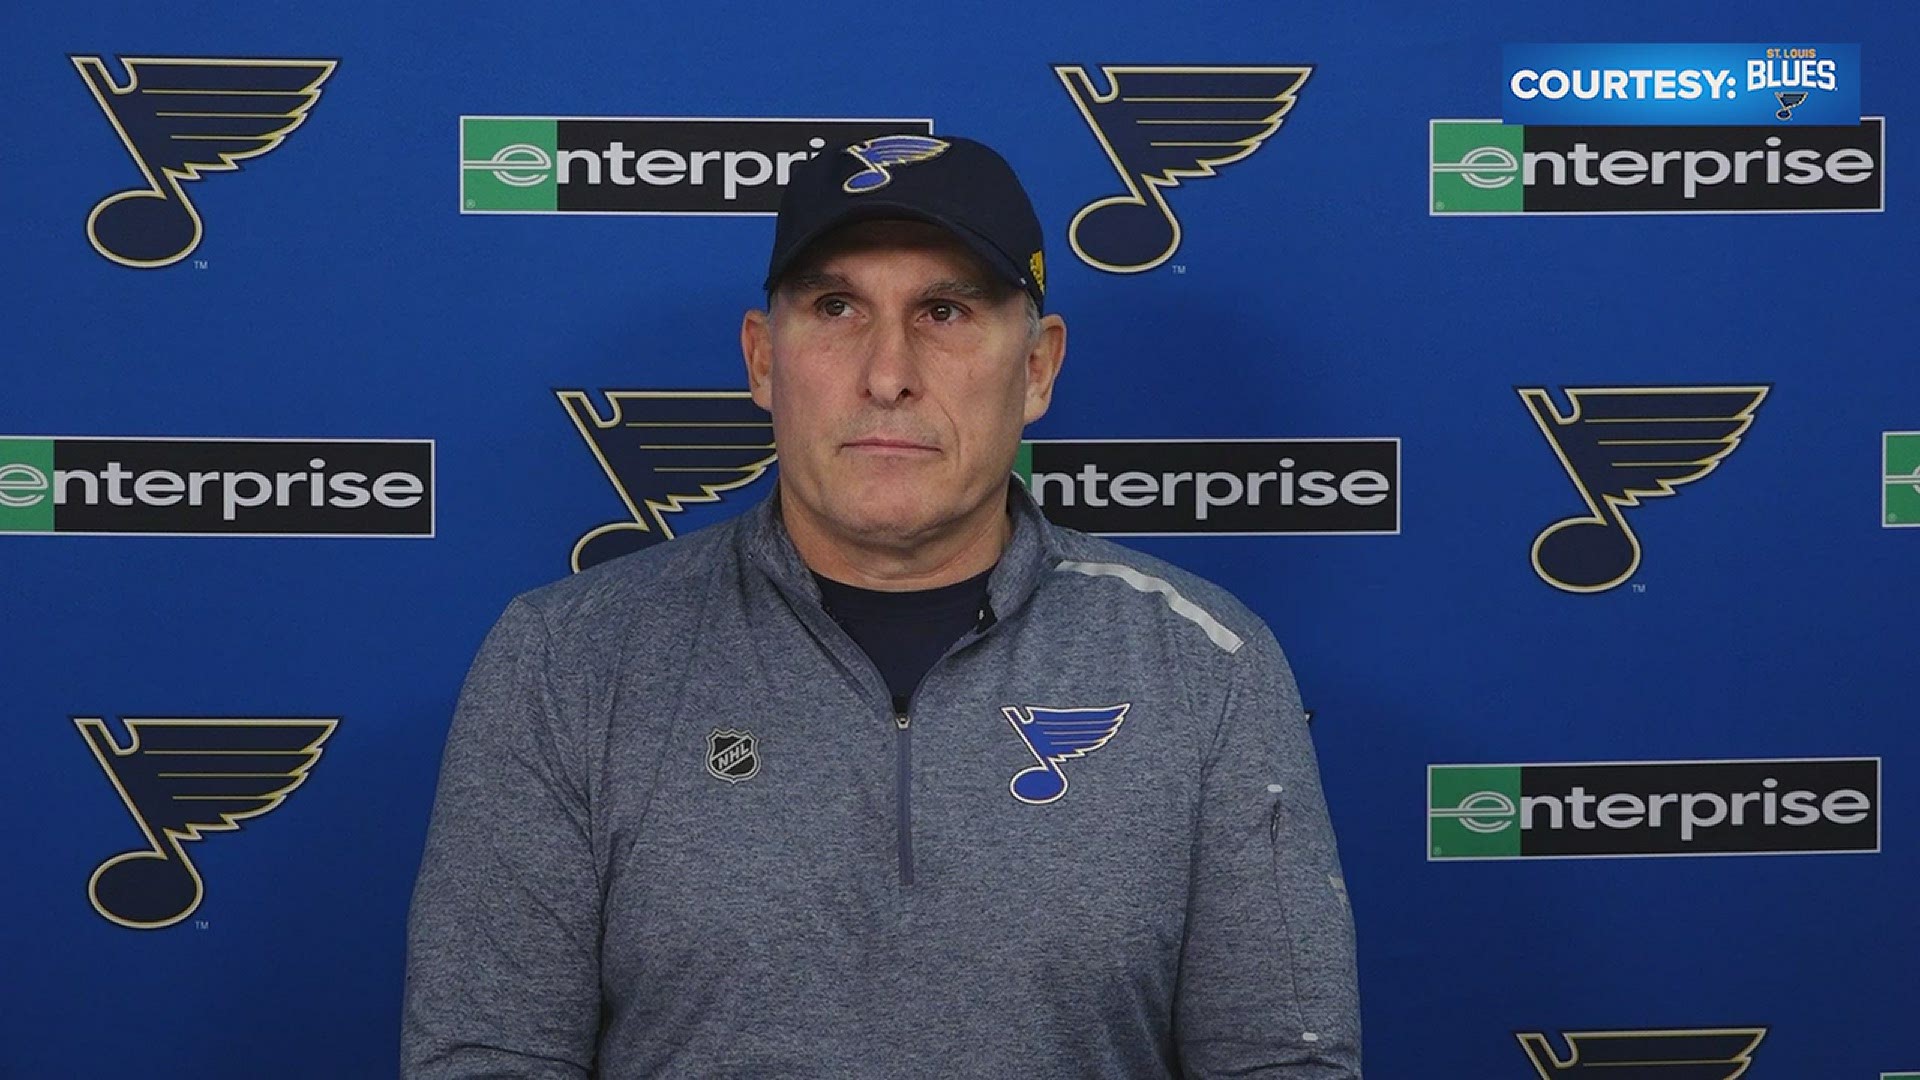 Berube and the Blues will begin their season on Jan. 13 against Colorado